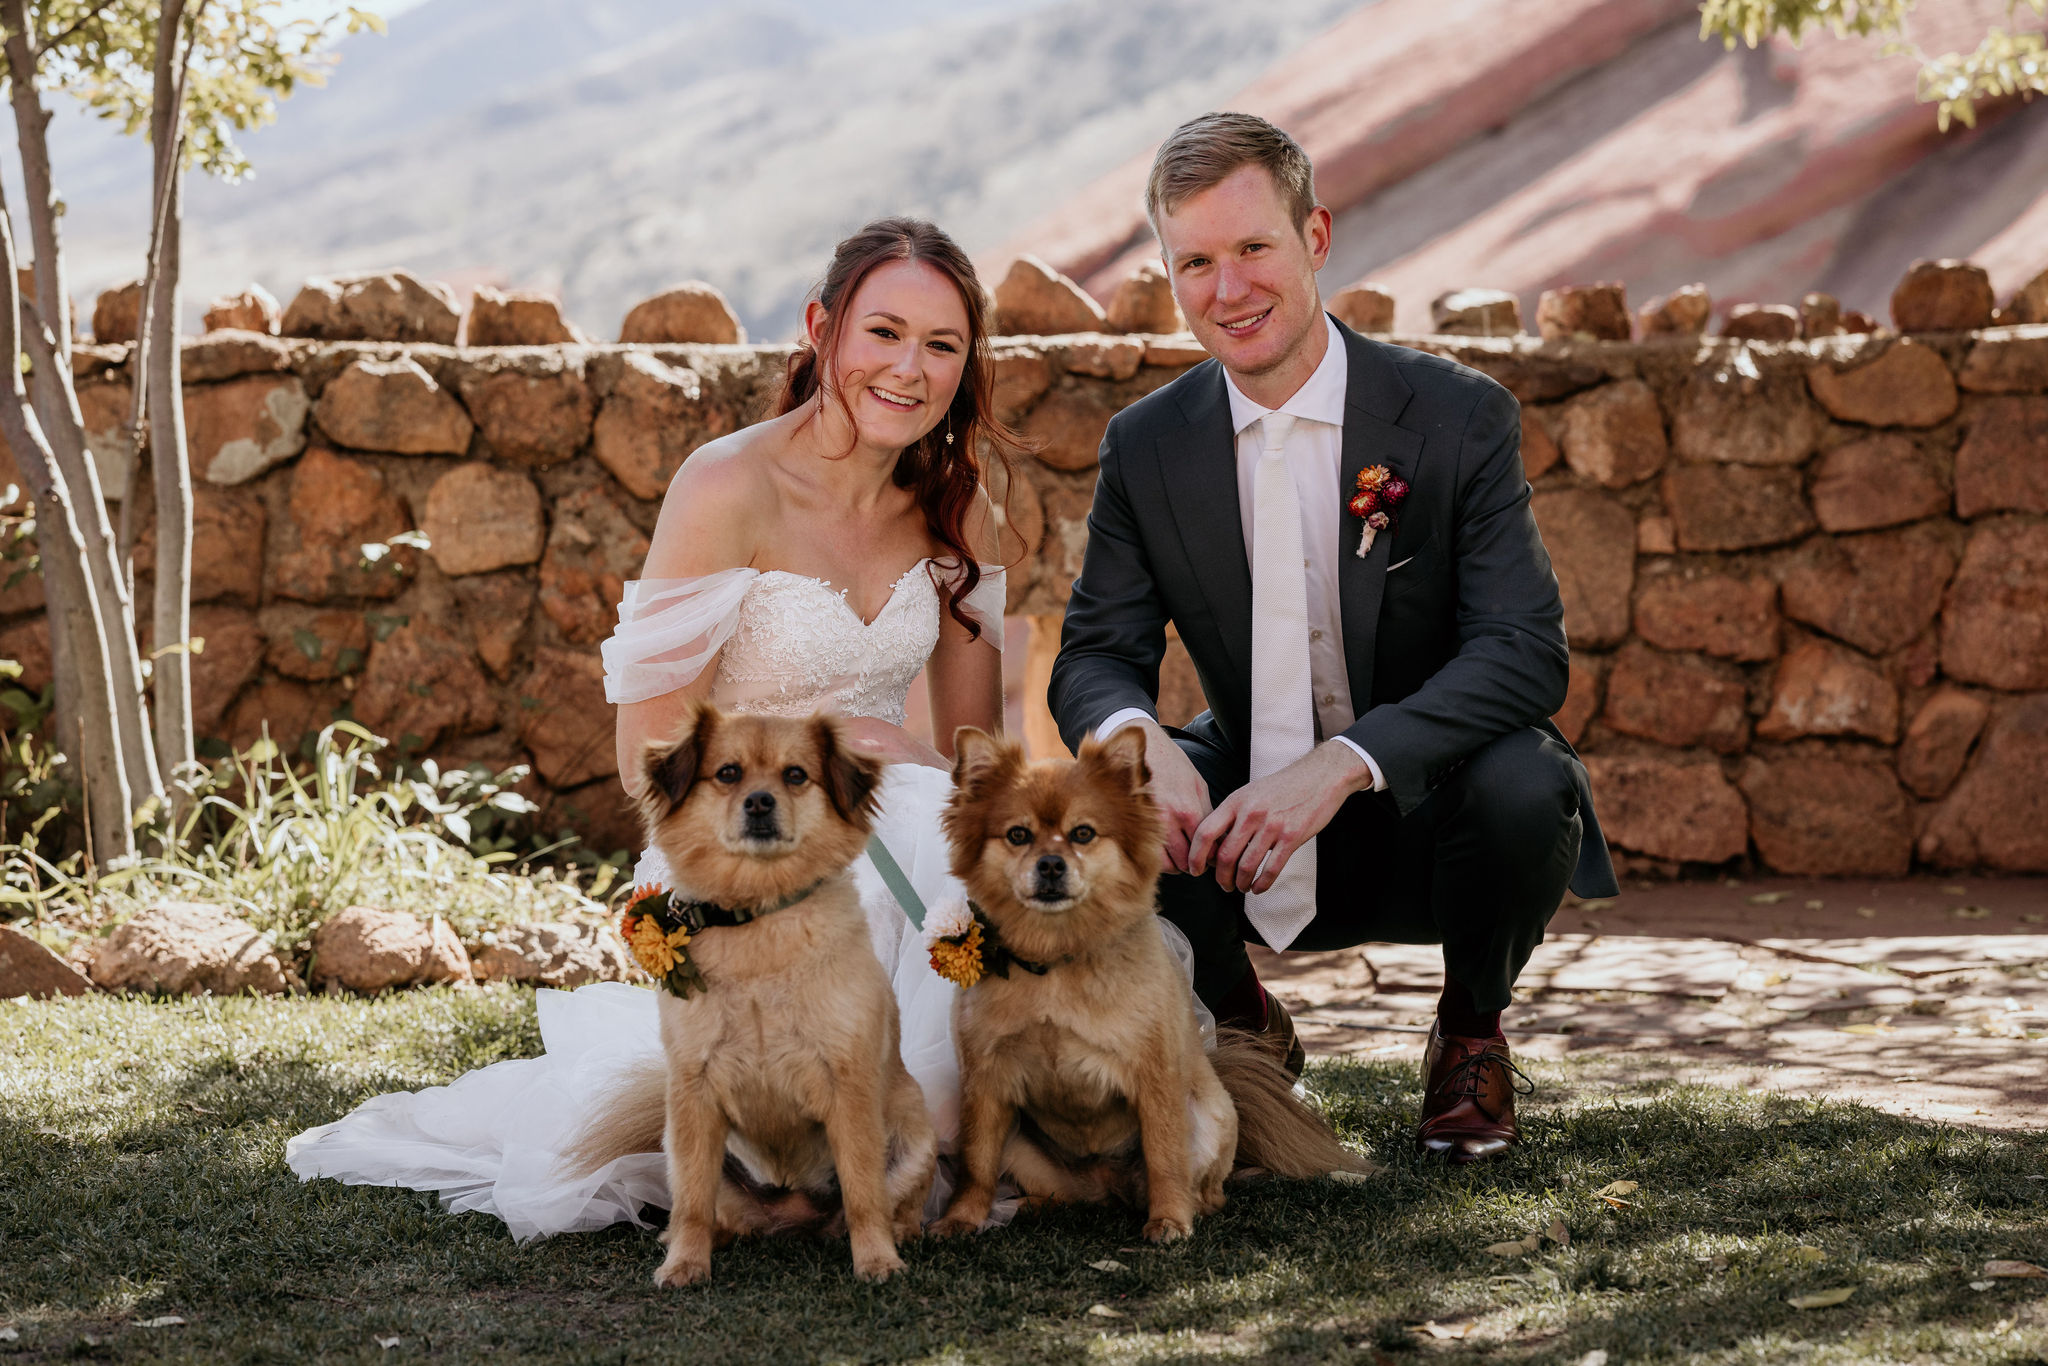 bride and groom pose with dogs at micro wedding at red rocks.